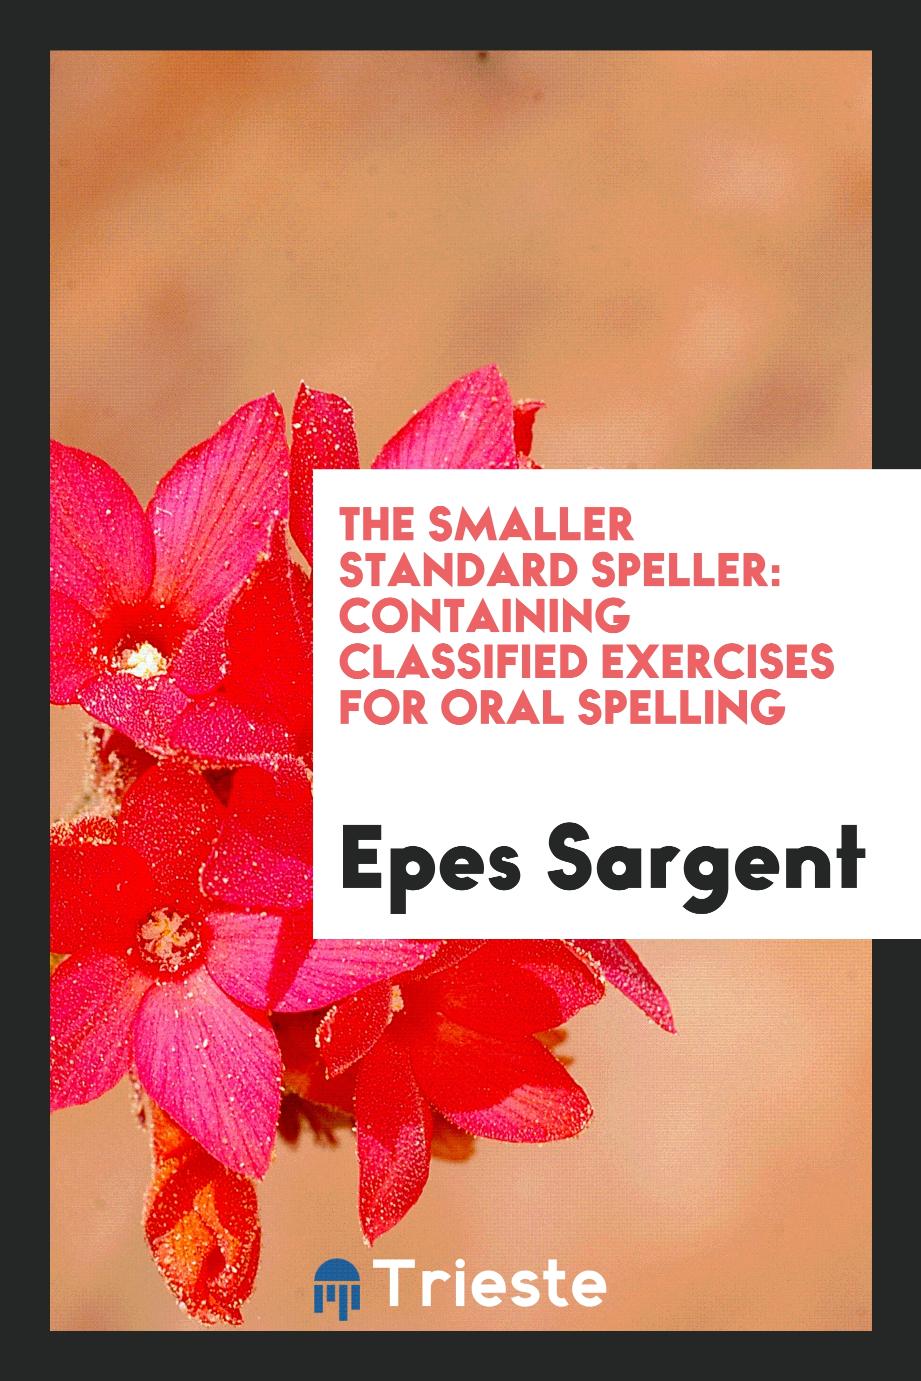 The Smaller Standard Speller: Containing Classified Exercises for Oral Spelling